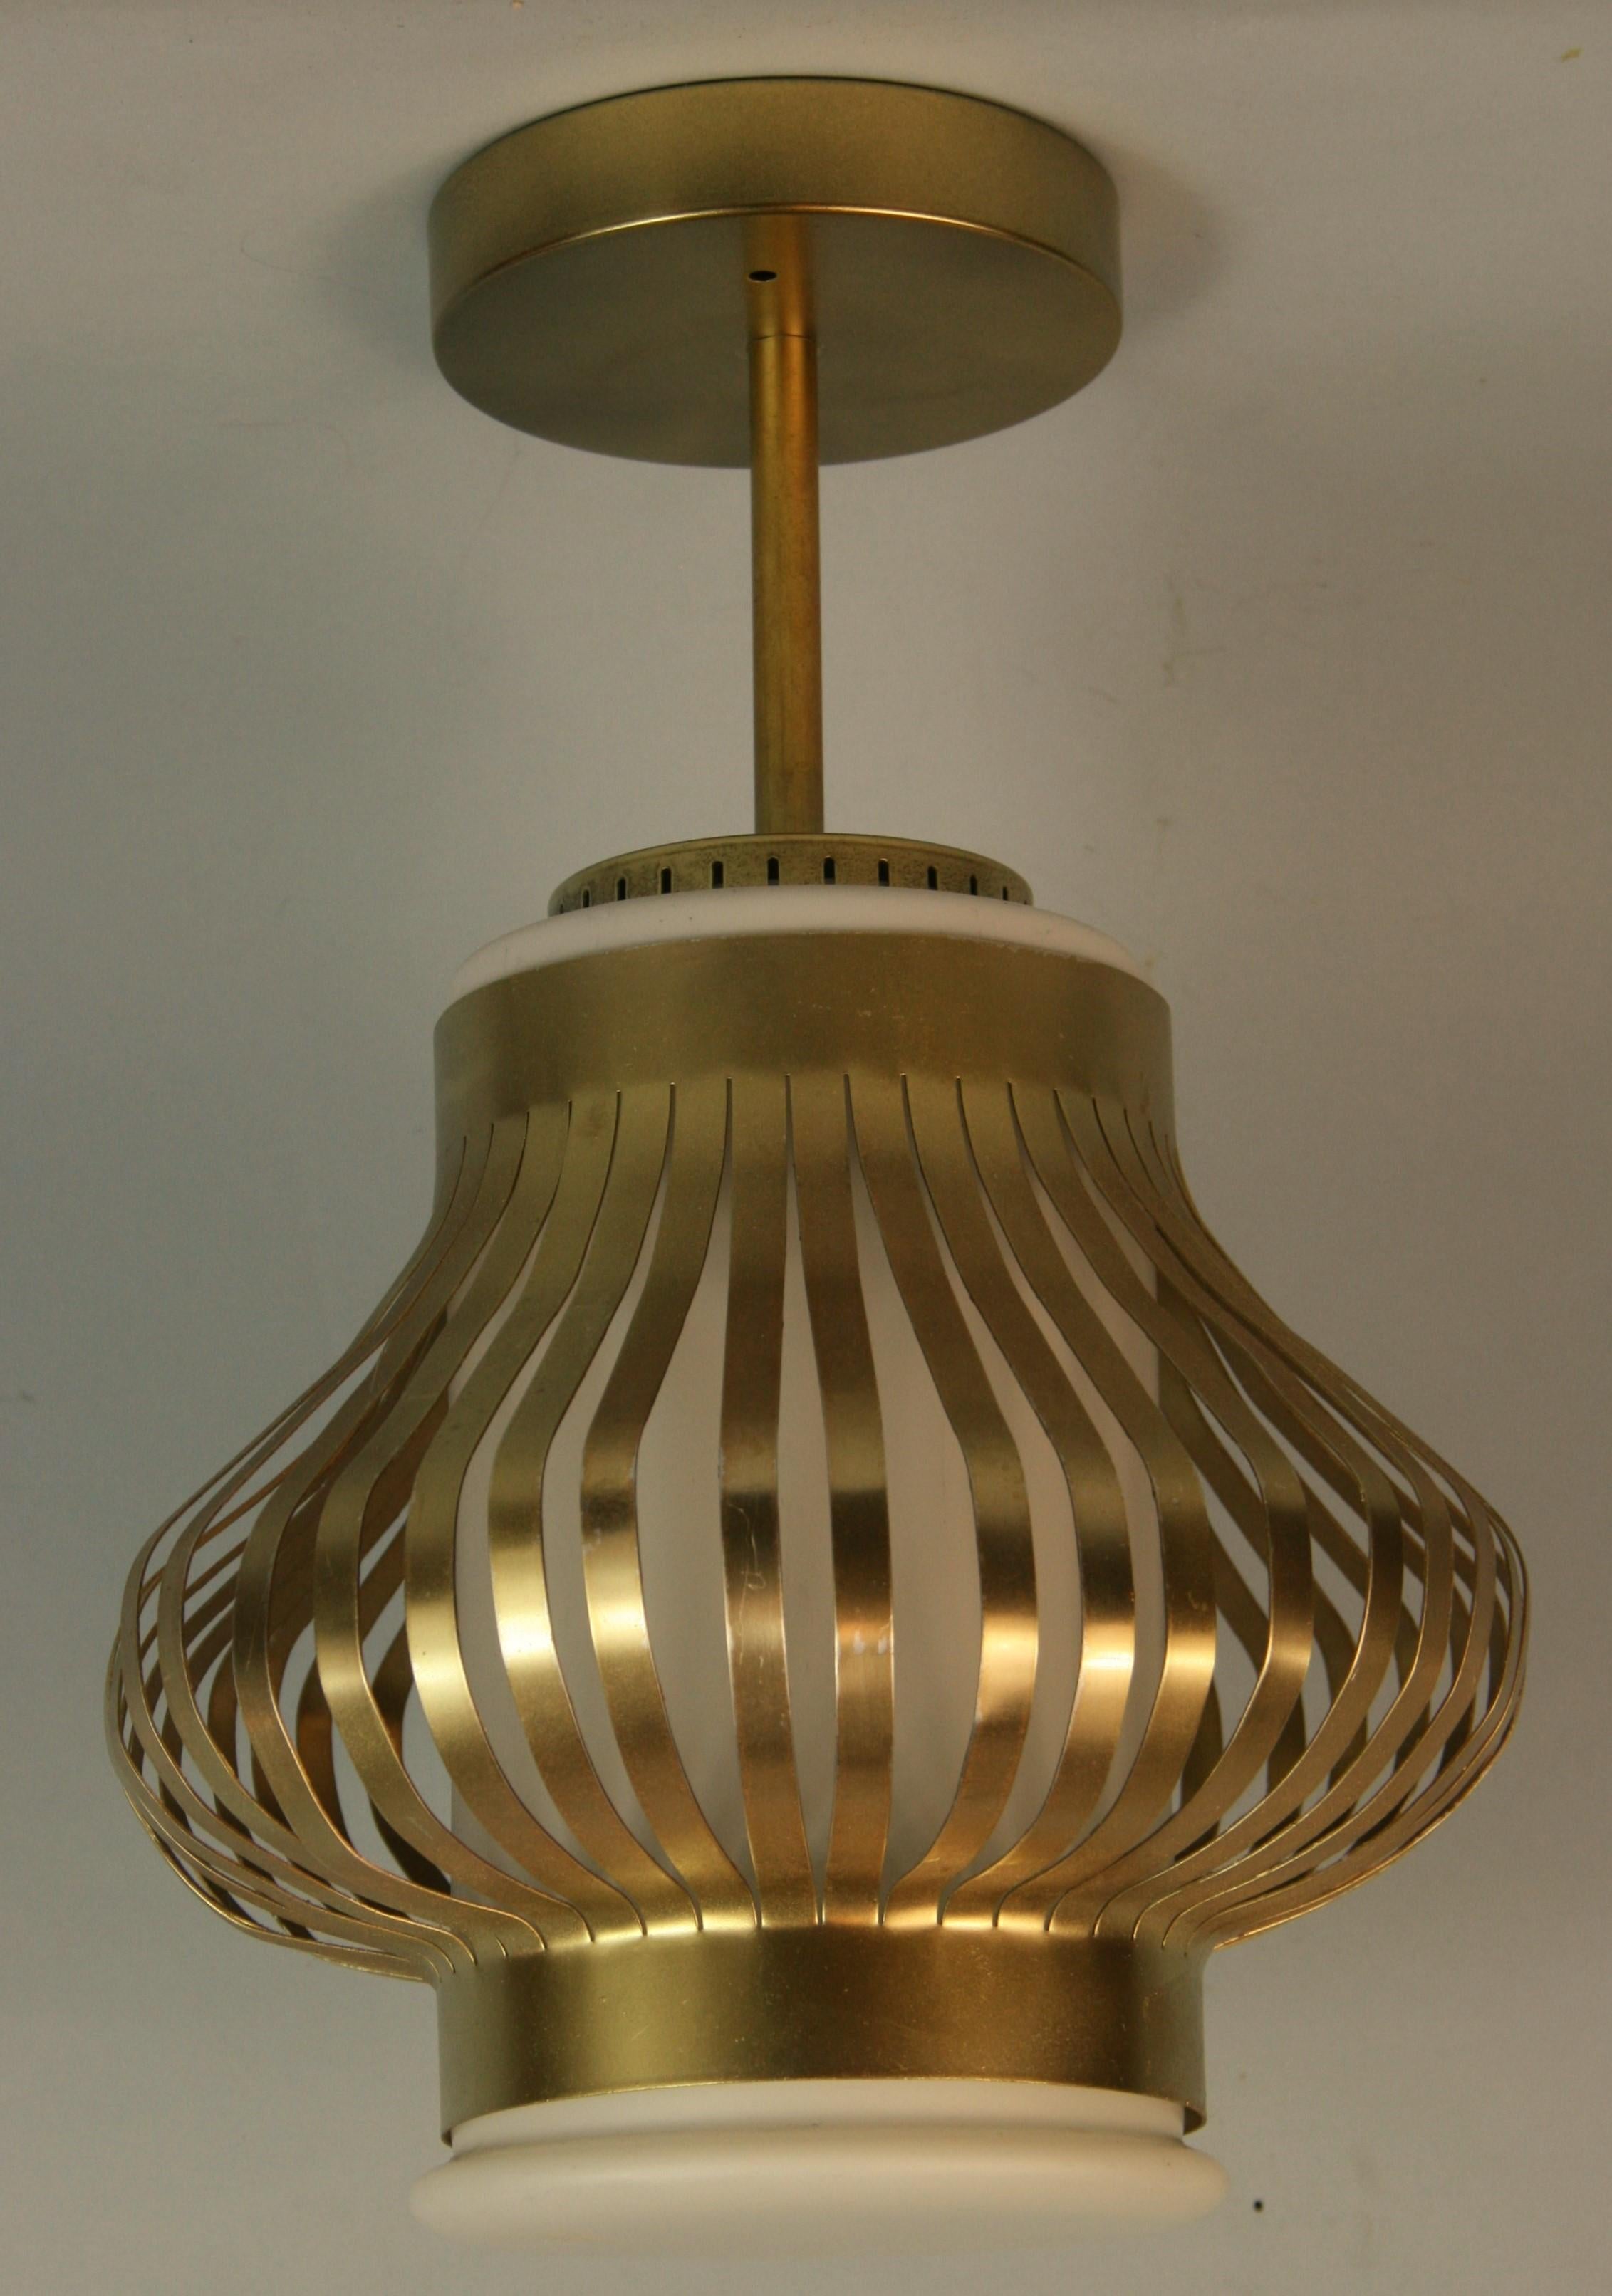 1601  French milk glass cylinder caged in brass cage

 Single light bulb 100 watt Edison based bulb.
 

 